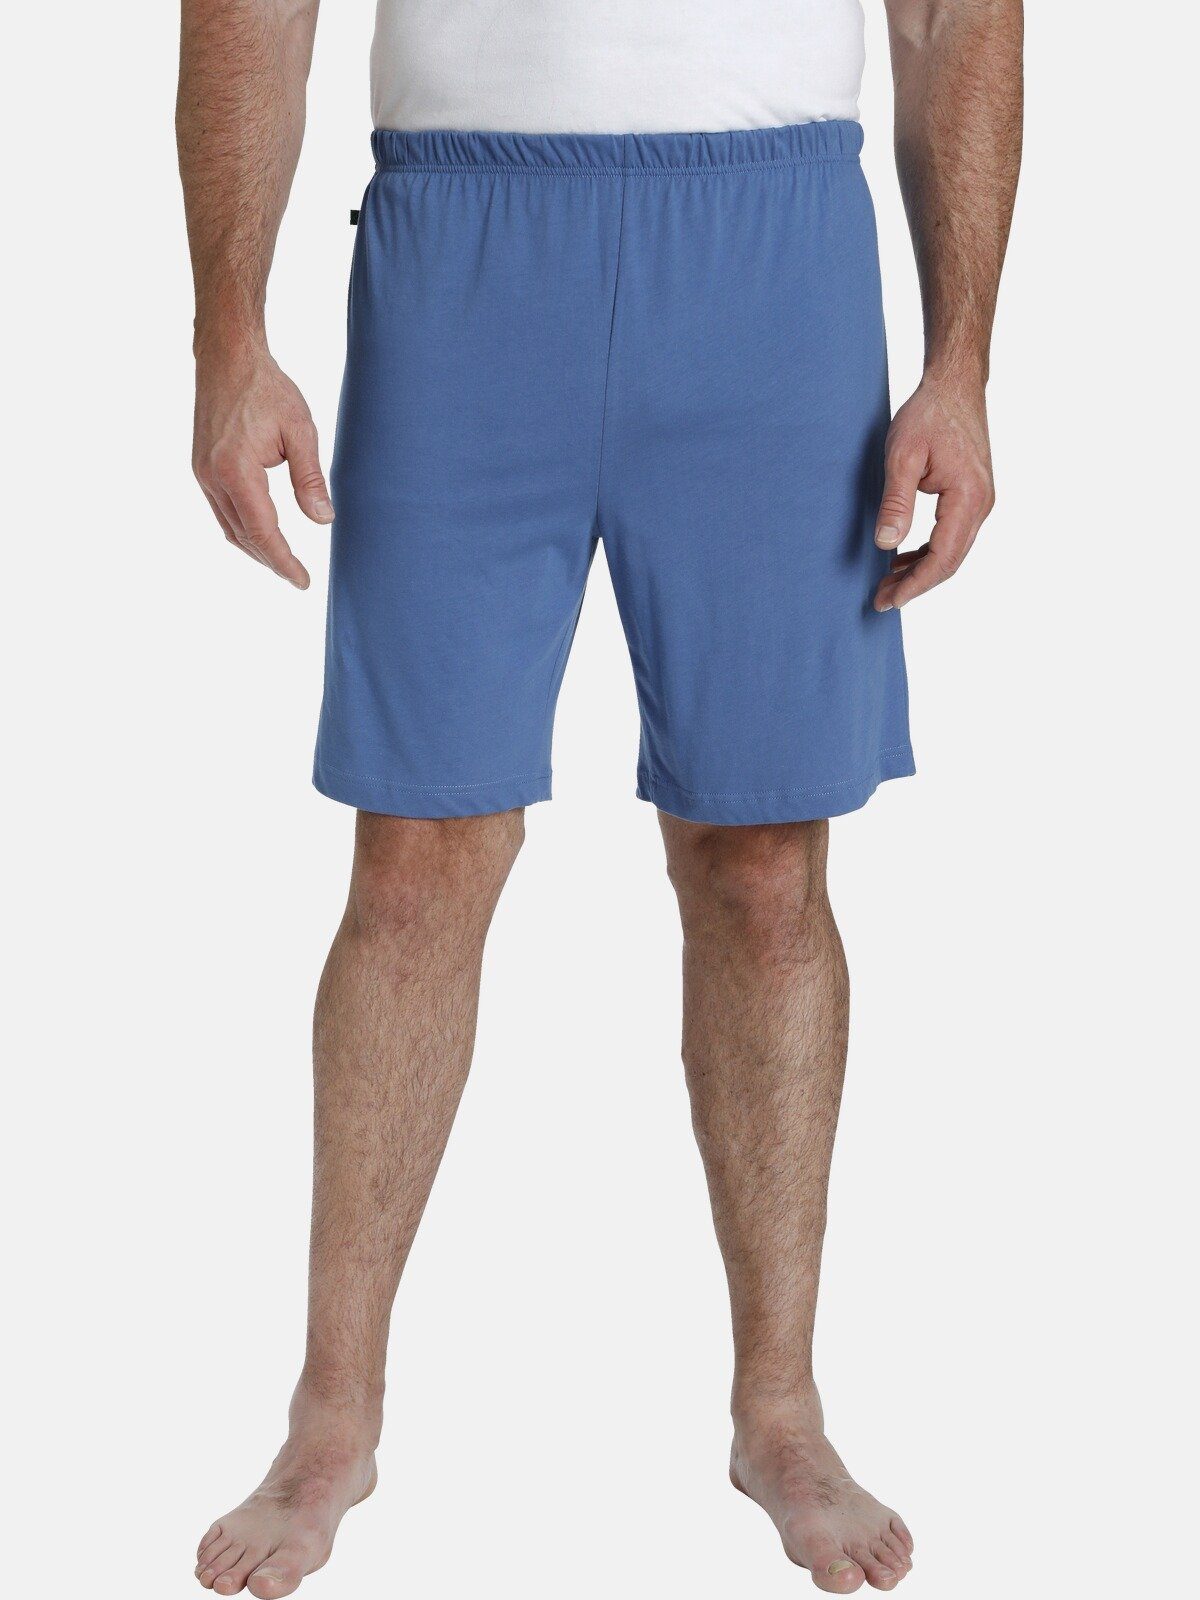 Charles Colby Schlafhose LORD MYCROFT leichte bequeme Relaxshorts blau | Shorts